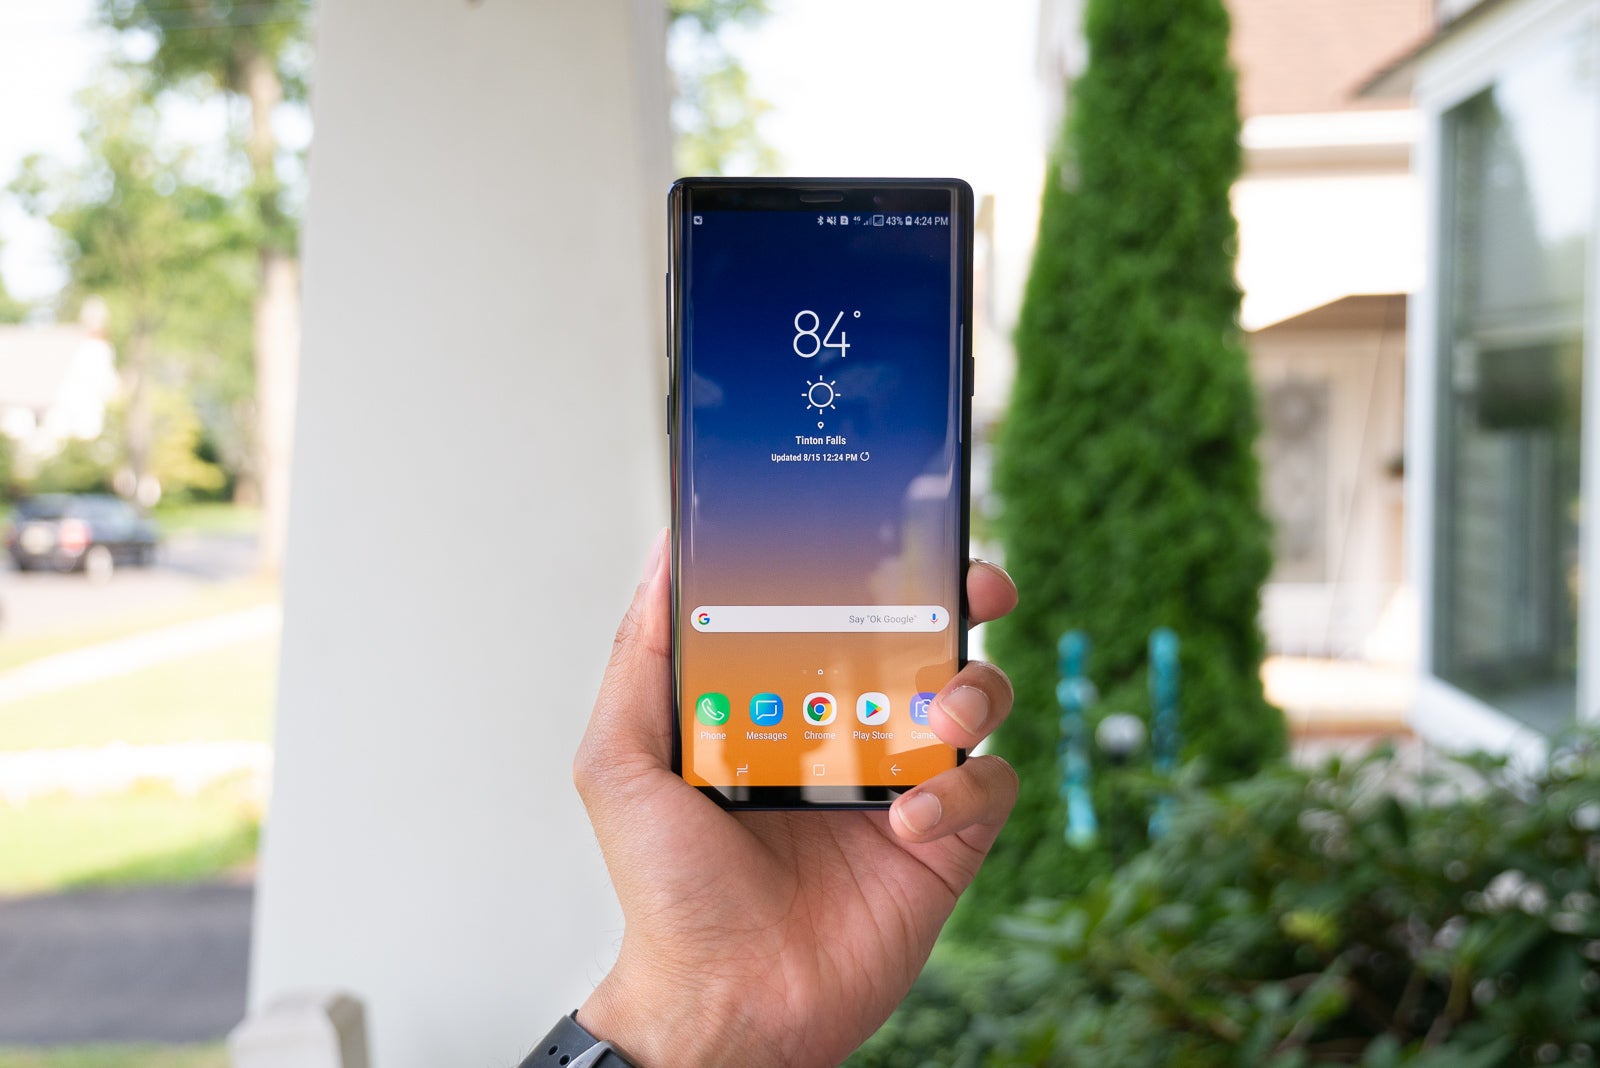 The Galaxy Note 9 includes a 4,000mAh battery - Samsung Galaxy Note 10 battery leak points towards biggest one yet